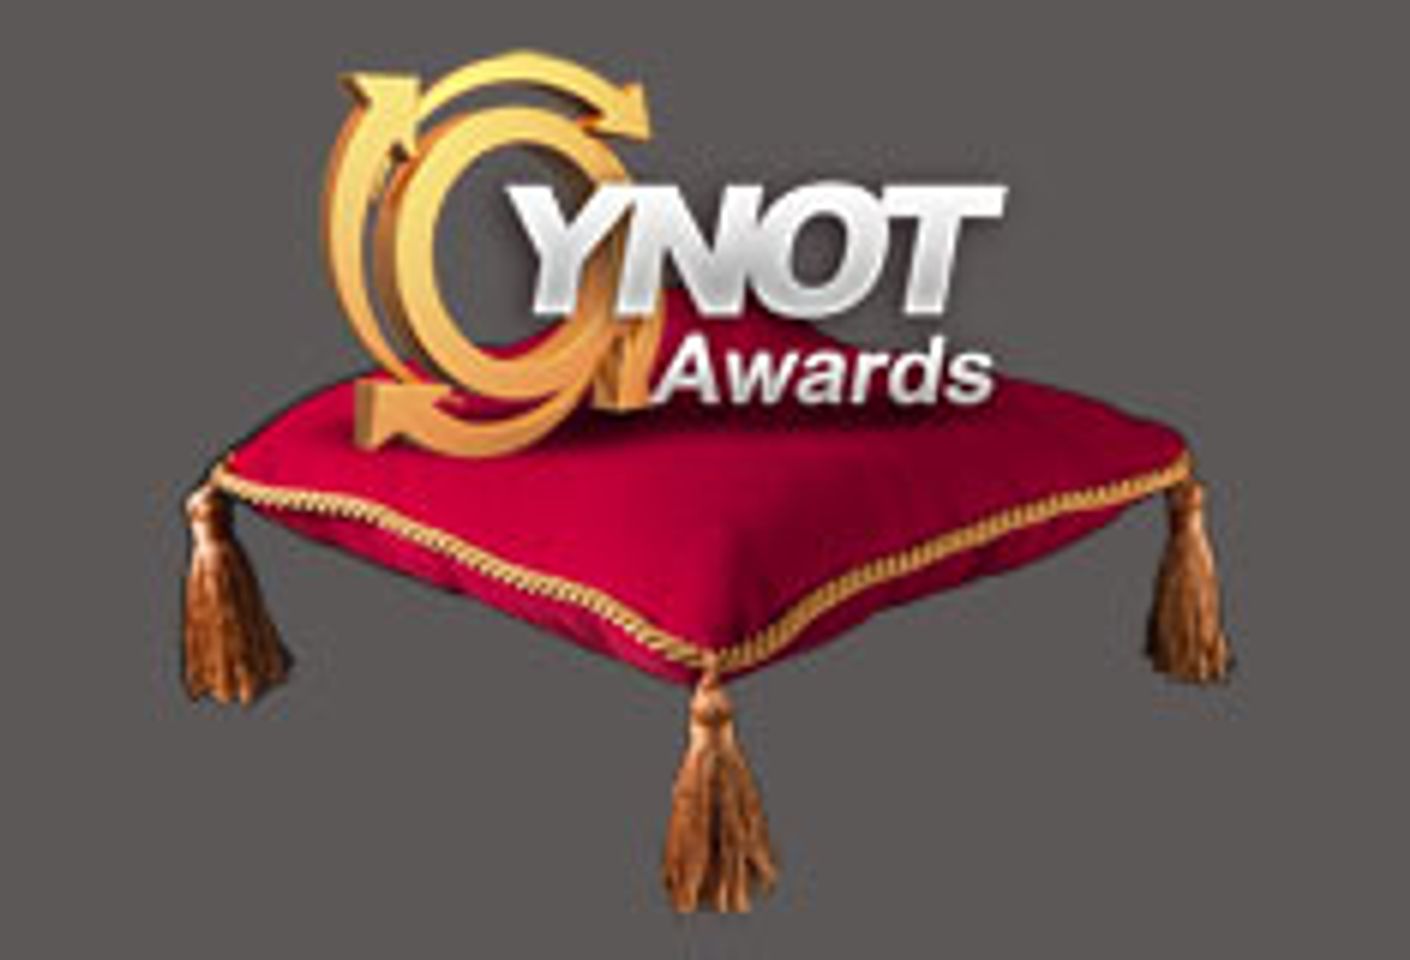 Voting Now Open for 2014 YNOT Awards